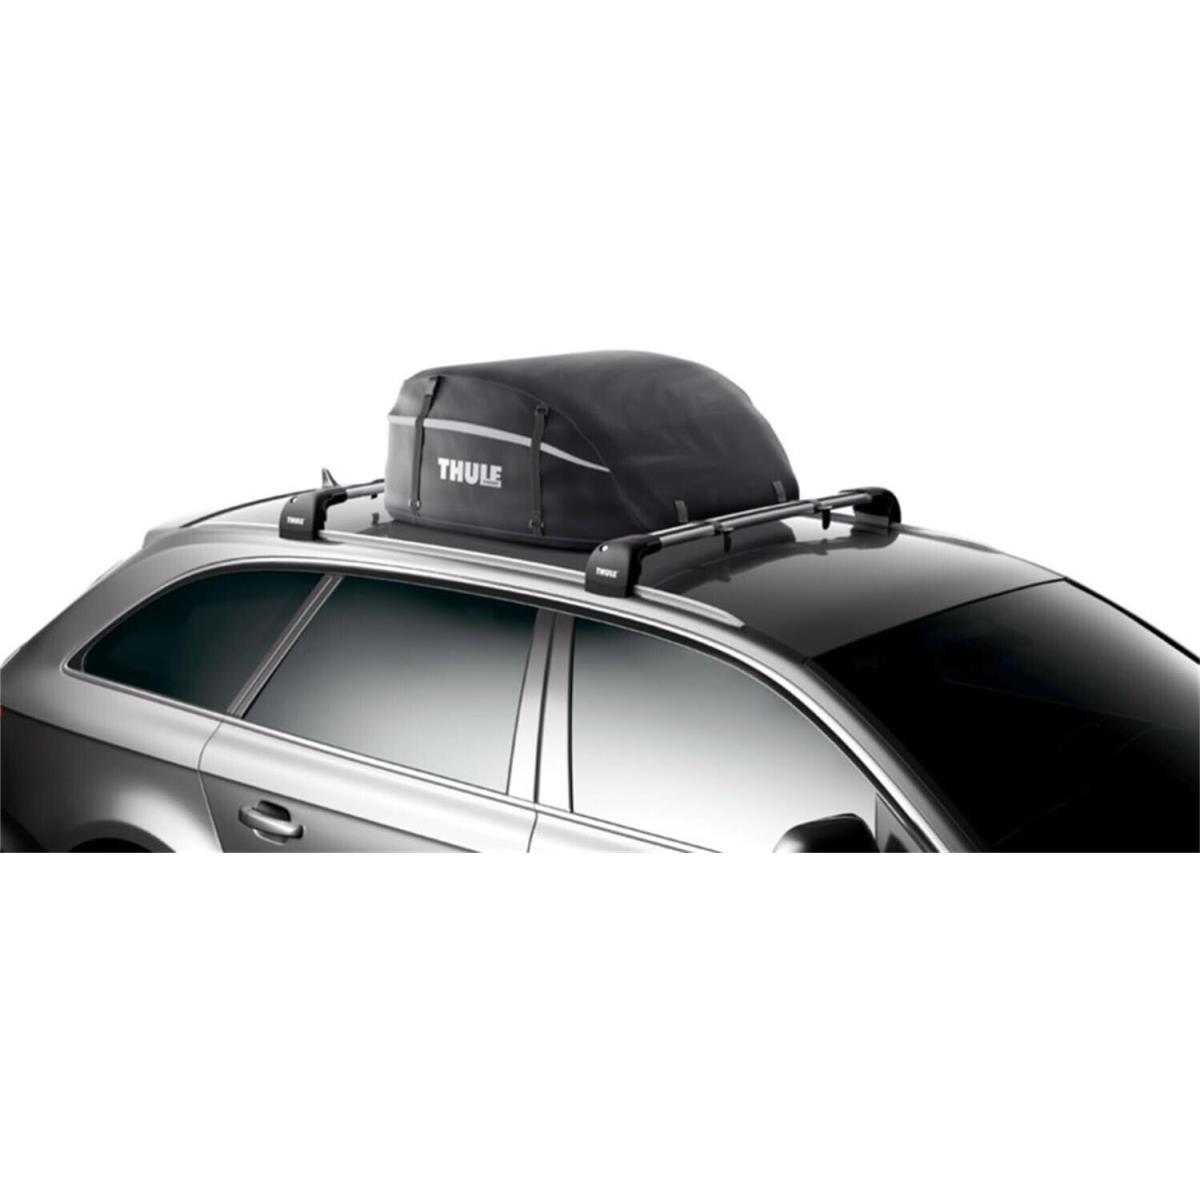 Thule Outbound Rooftop Bag Cargo Carrier 868 Black W/ Box 36 L x 36 W x 17 H